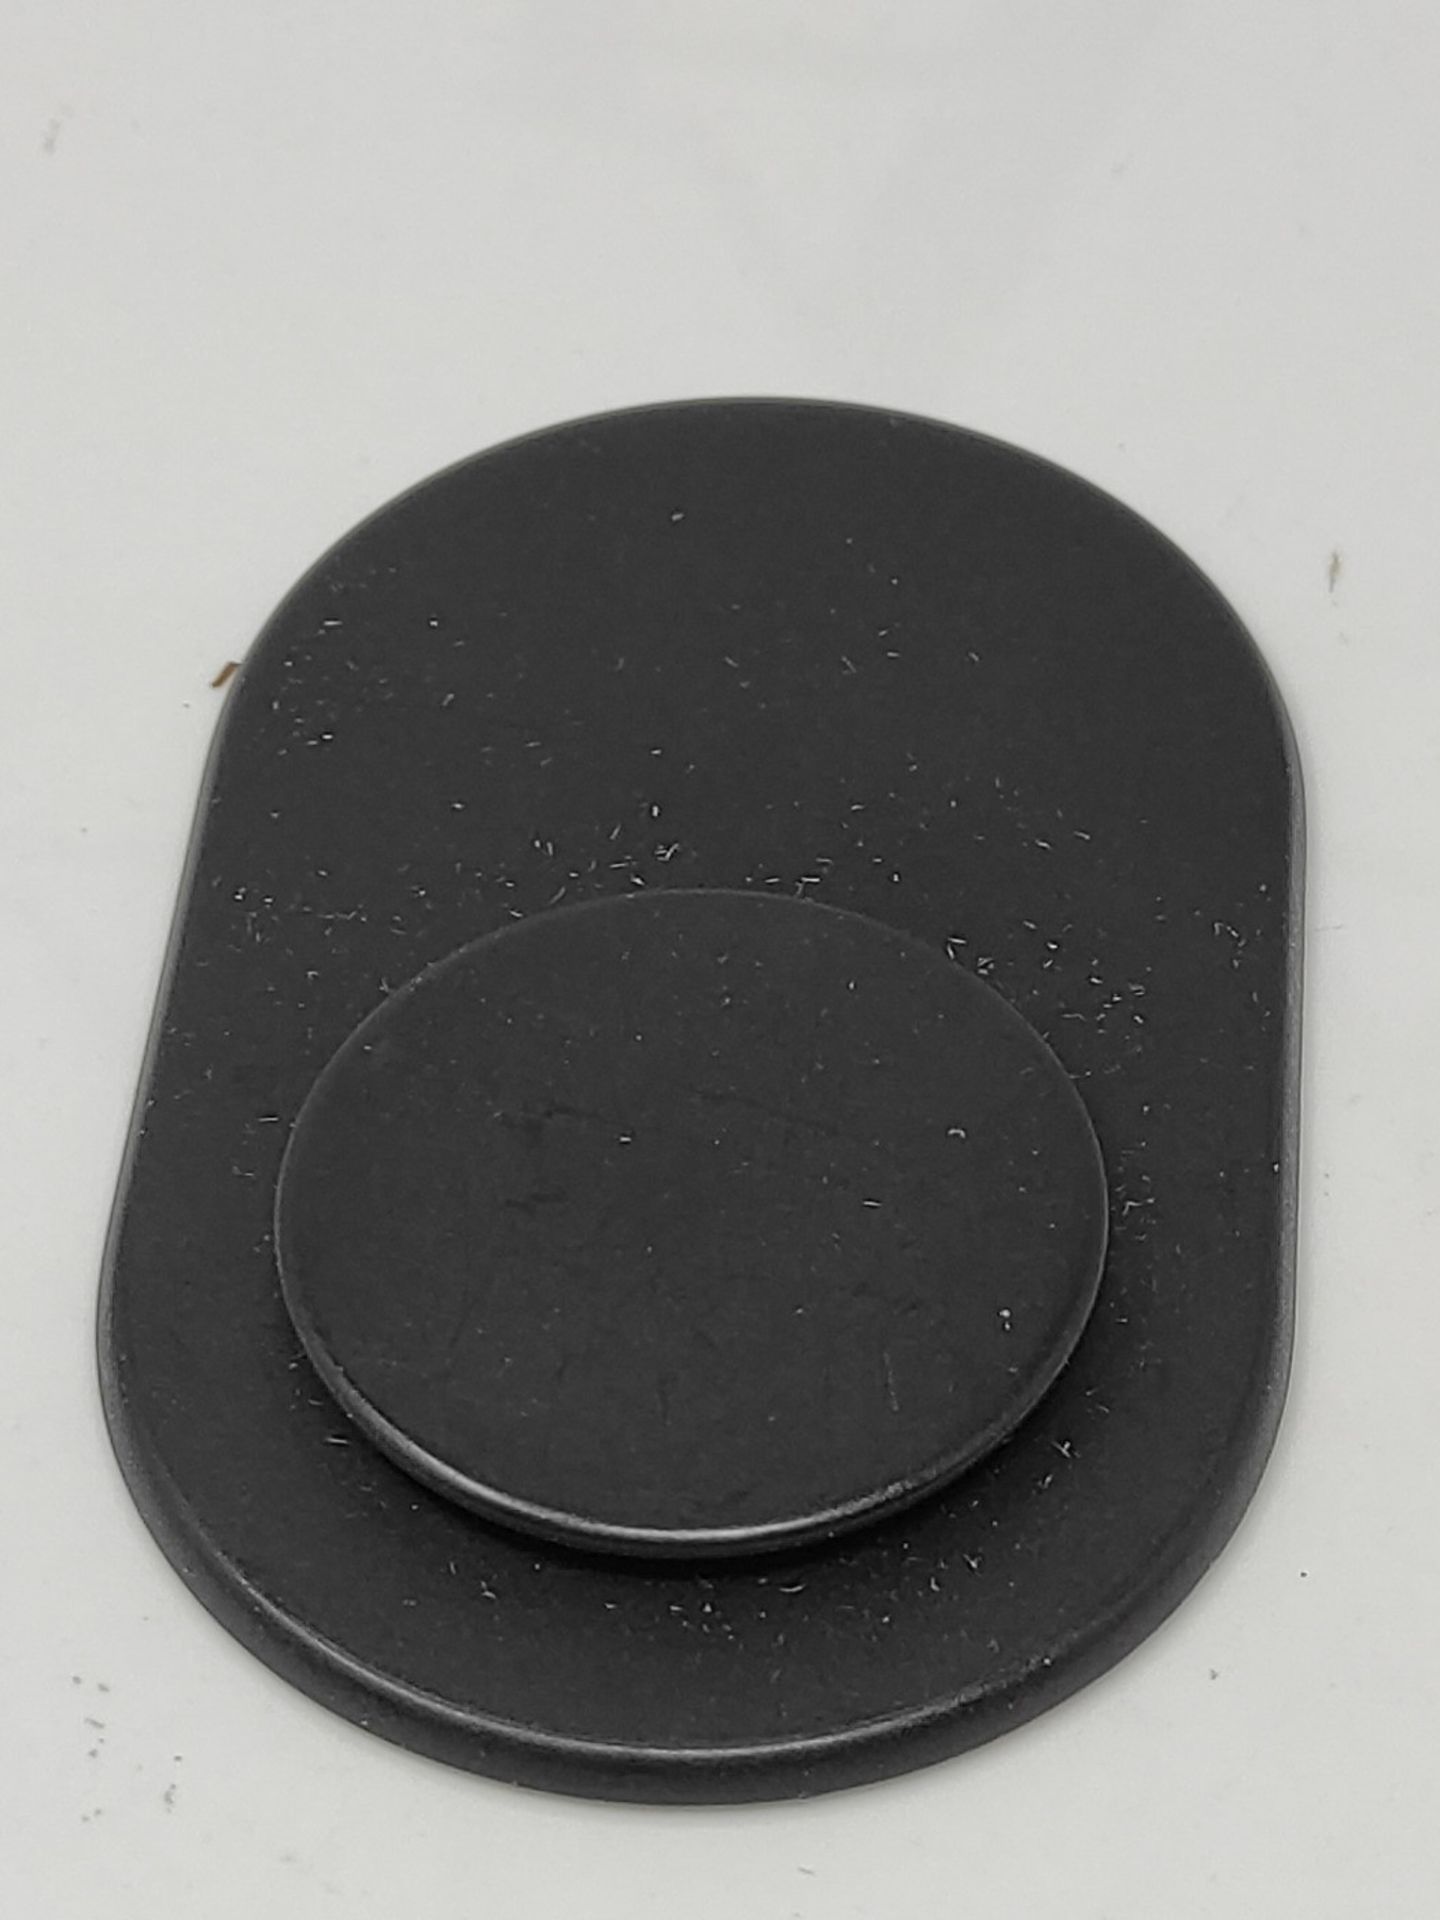 PopSockets: PopGrip for MagSafe - Expanding Phone Stand and Grip with a Swappable Top - Image 2 of 2